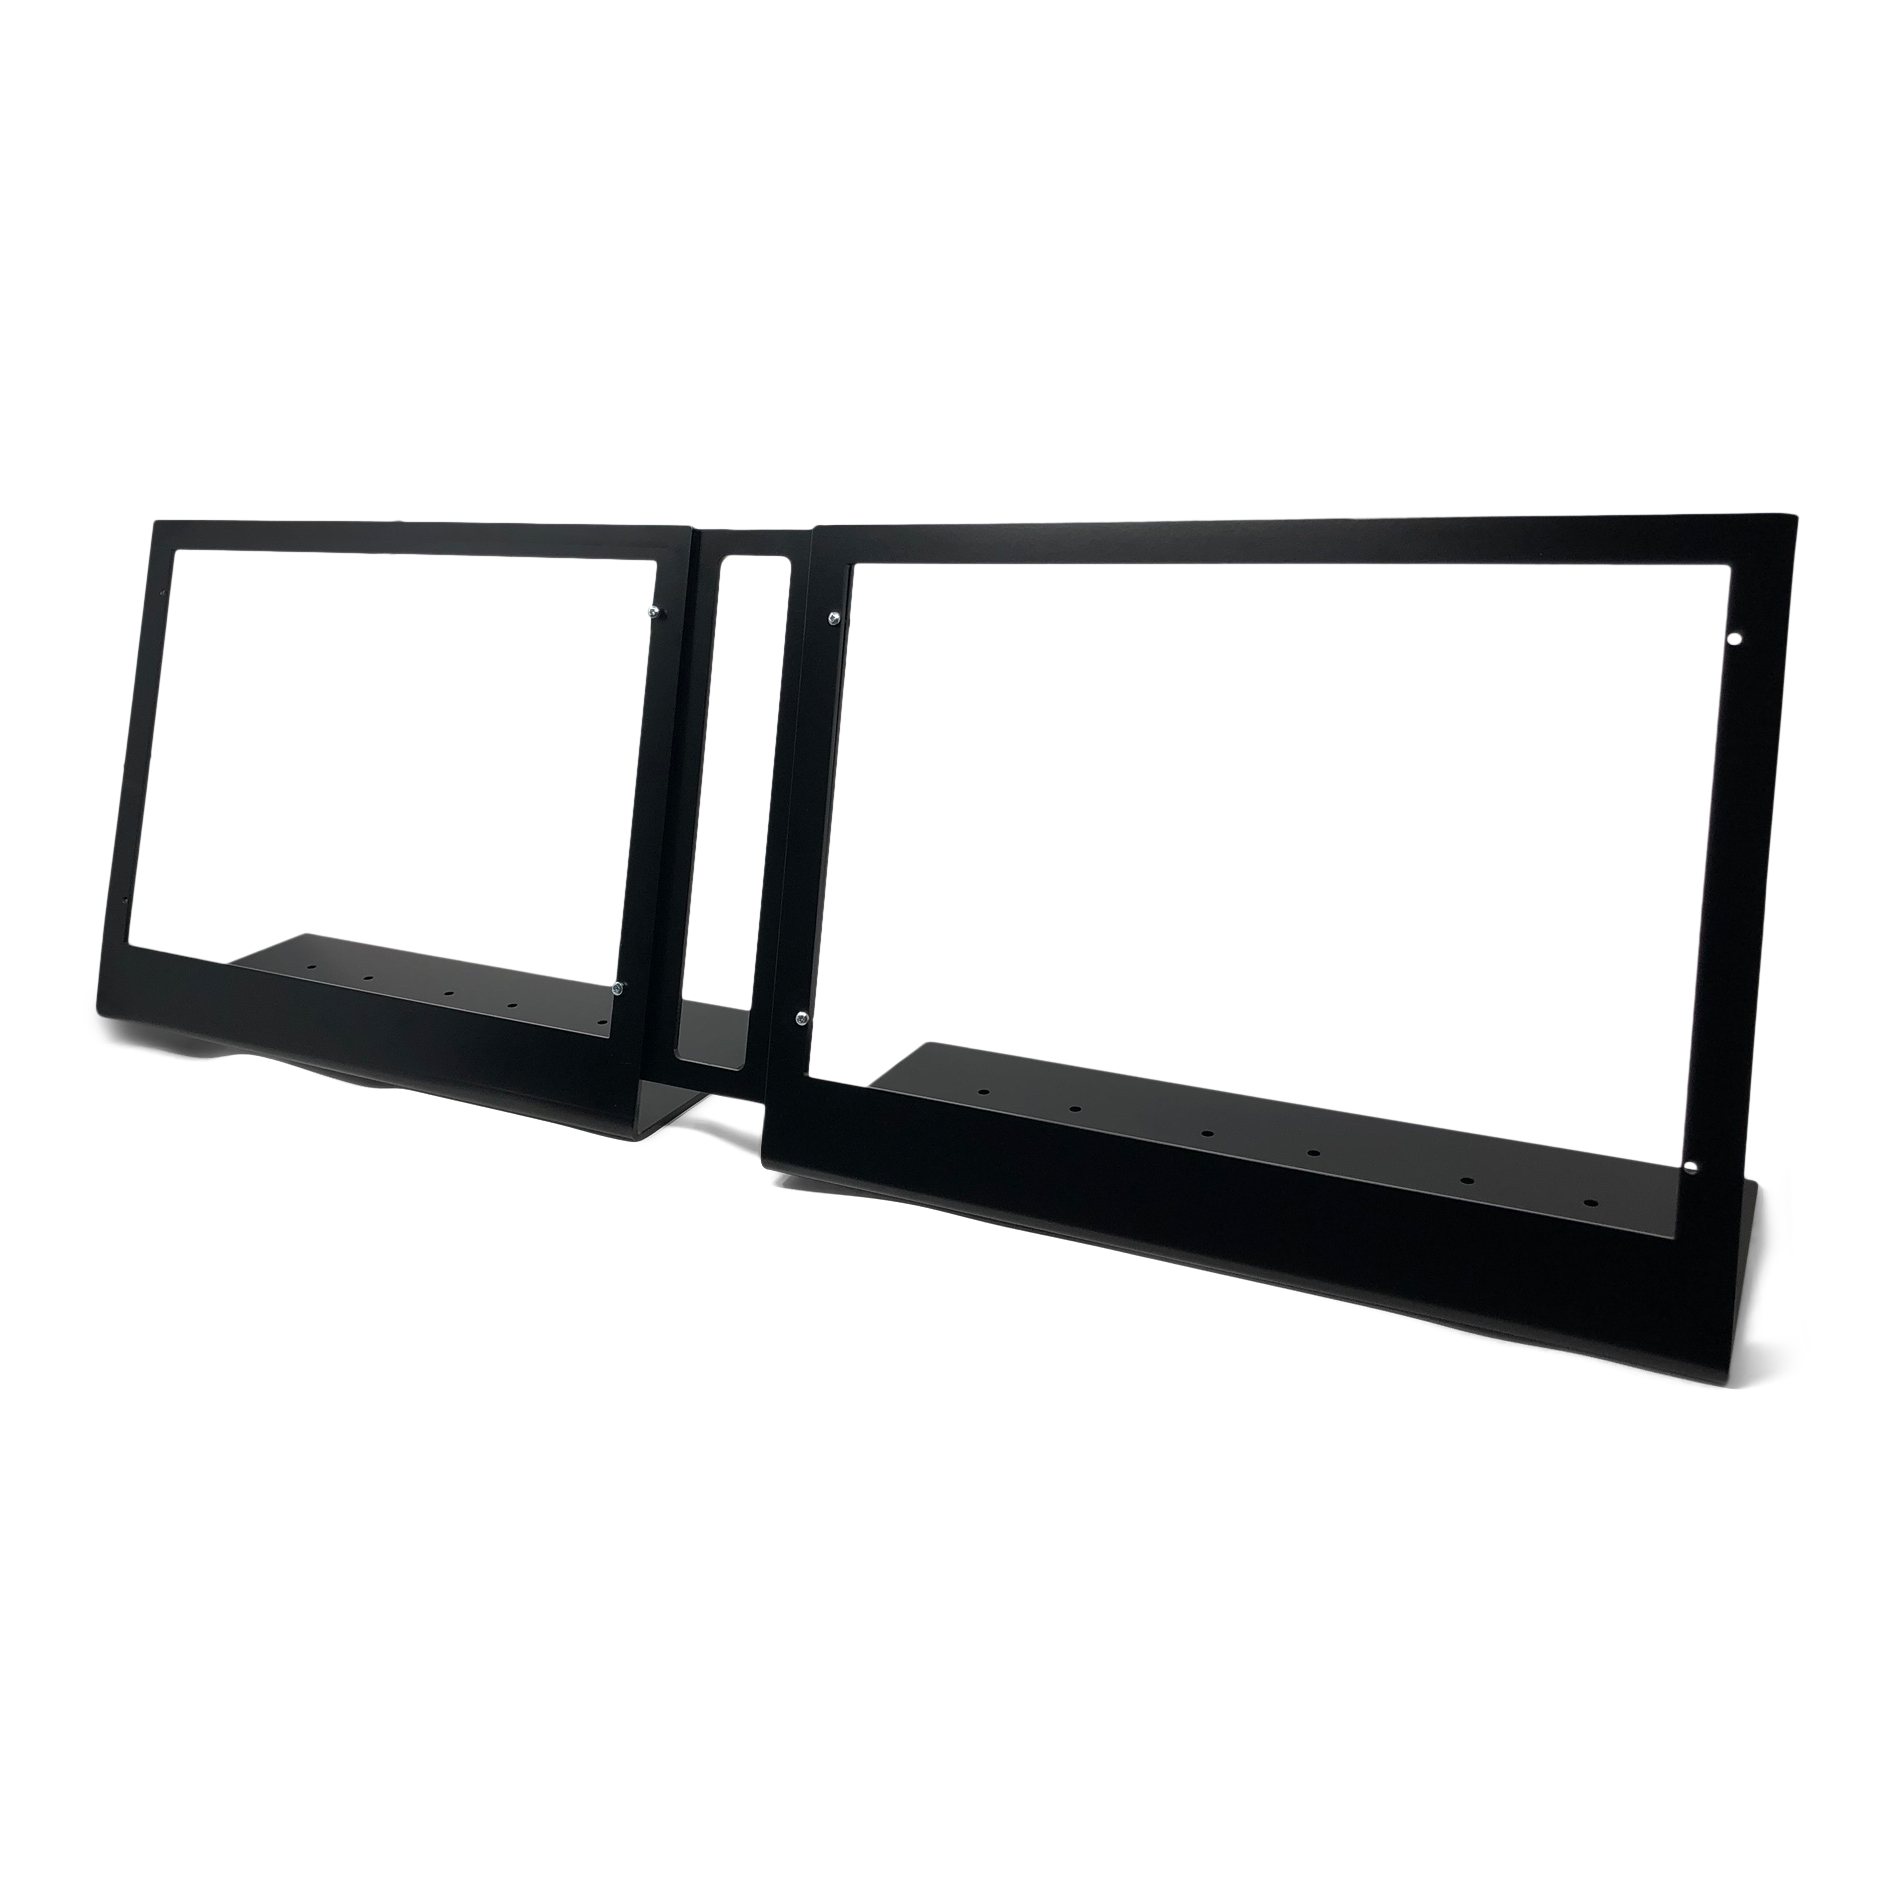 RealSimGear G1000 Suite Stand